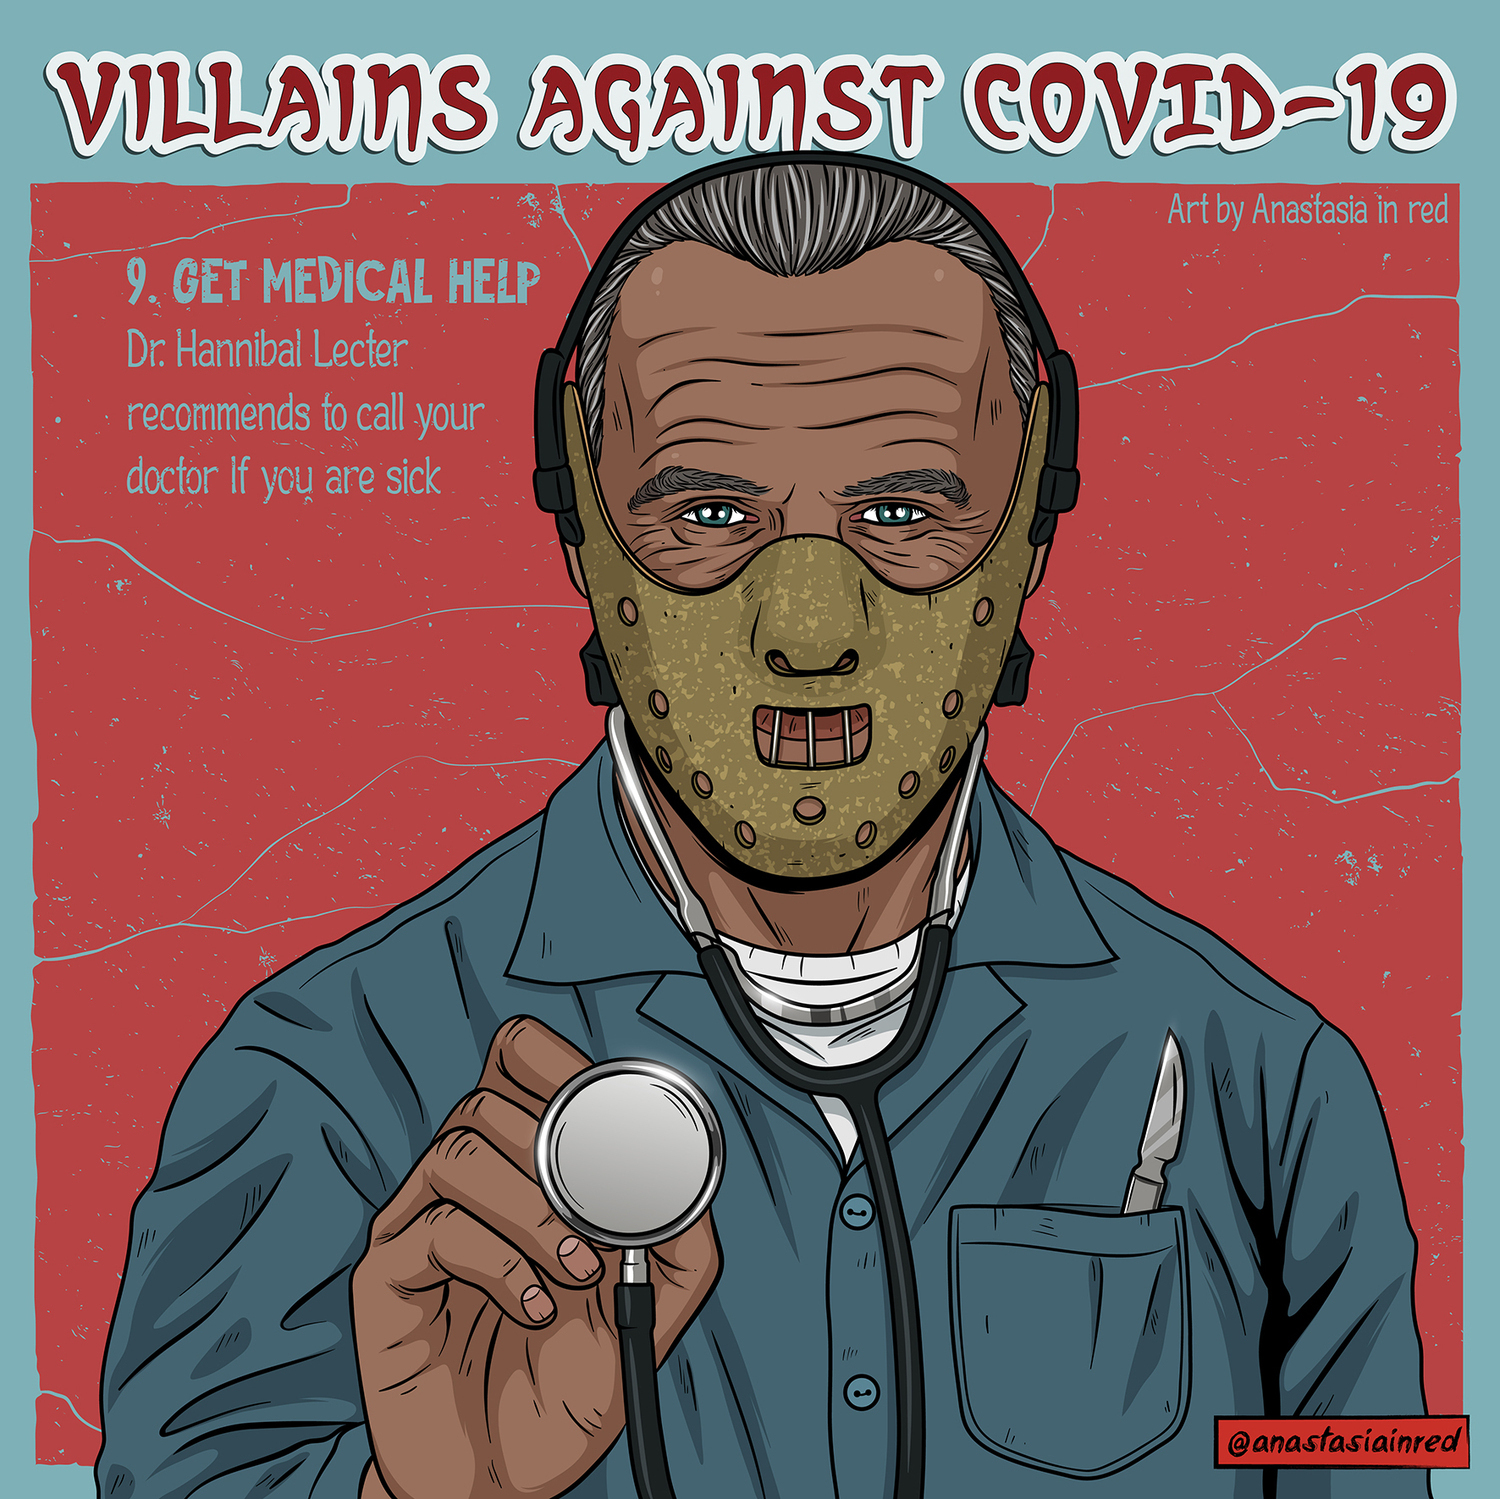 Hannibal Lecter against Covid-19